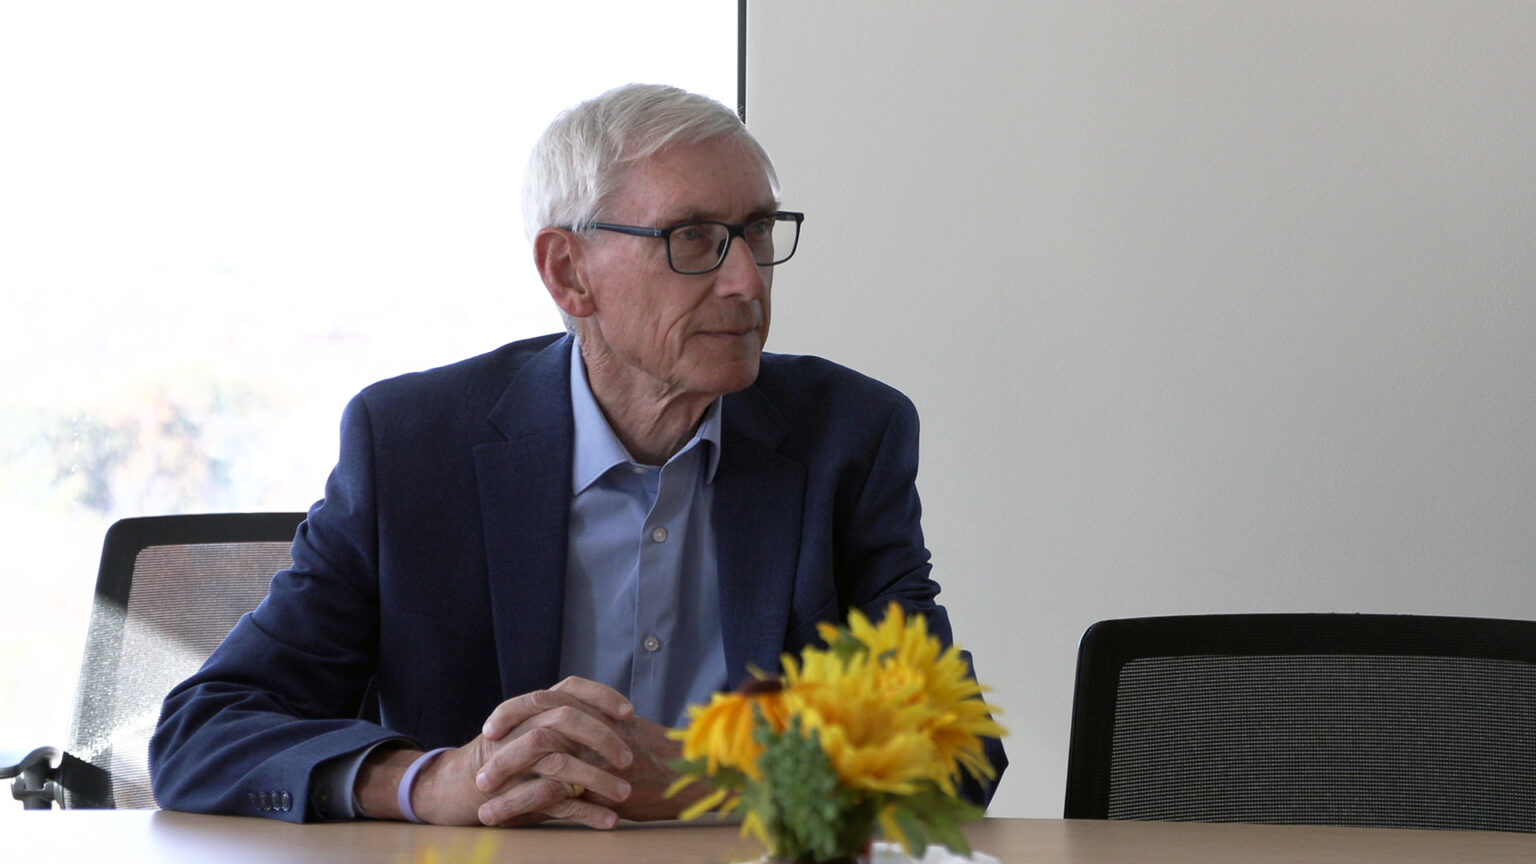 Tony Evers sits at a table with his hands folded on its surface, with an empty chair to one side, out-of-focus flowers in the foreground and sunlight illuminating a window in the background.